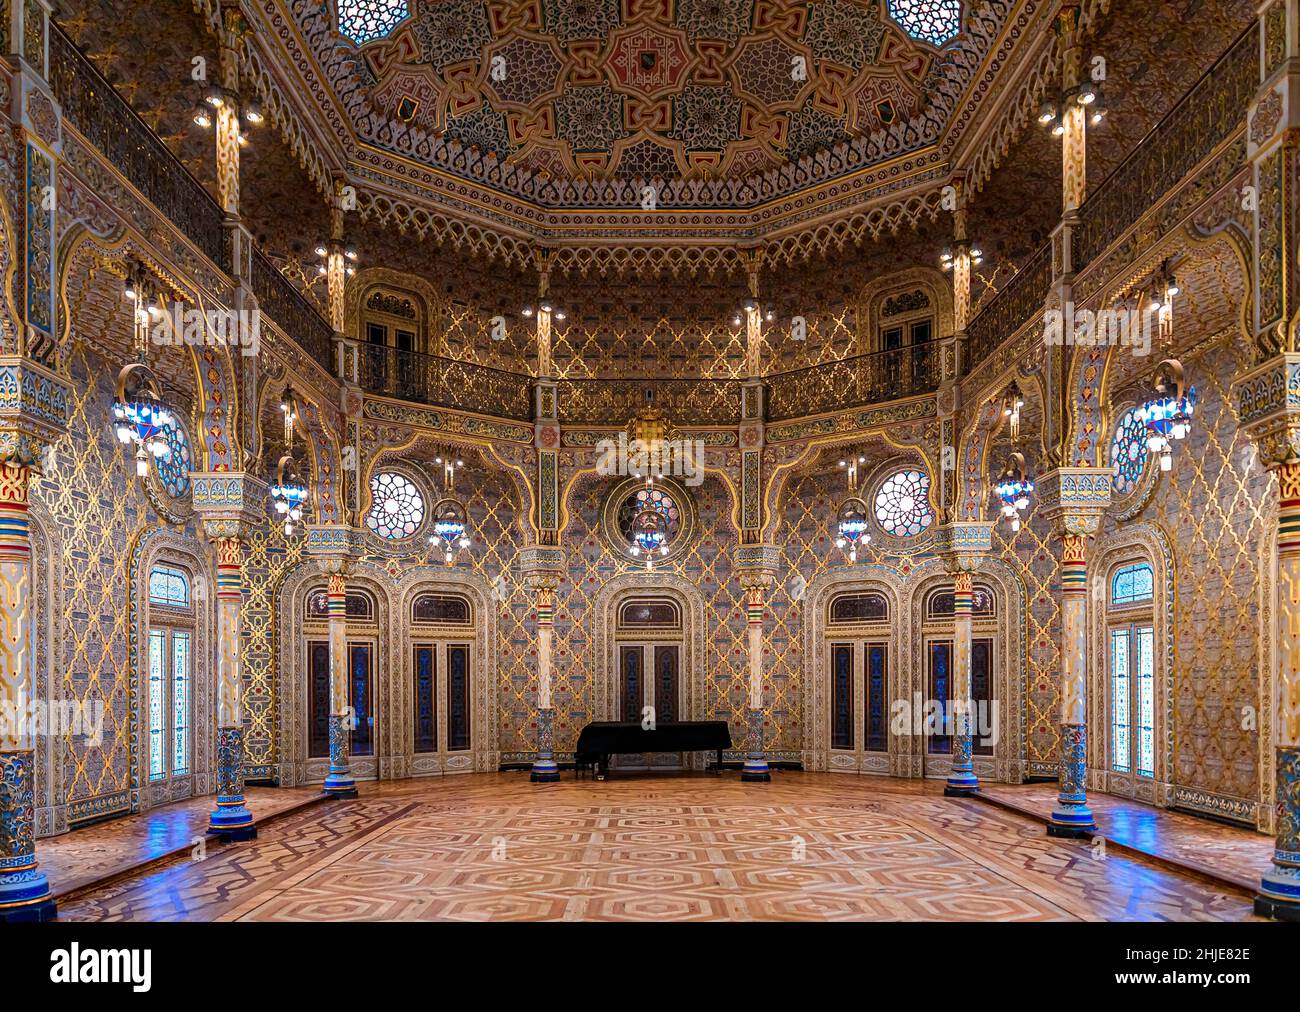 Porto, Portugal - May 31, 2018: Interior of the historical building of the Stock  Exchange Palace or Palacio da Bolsa, famous Arab Golden room Stock Photo -  Alamy